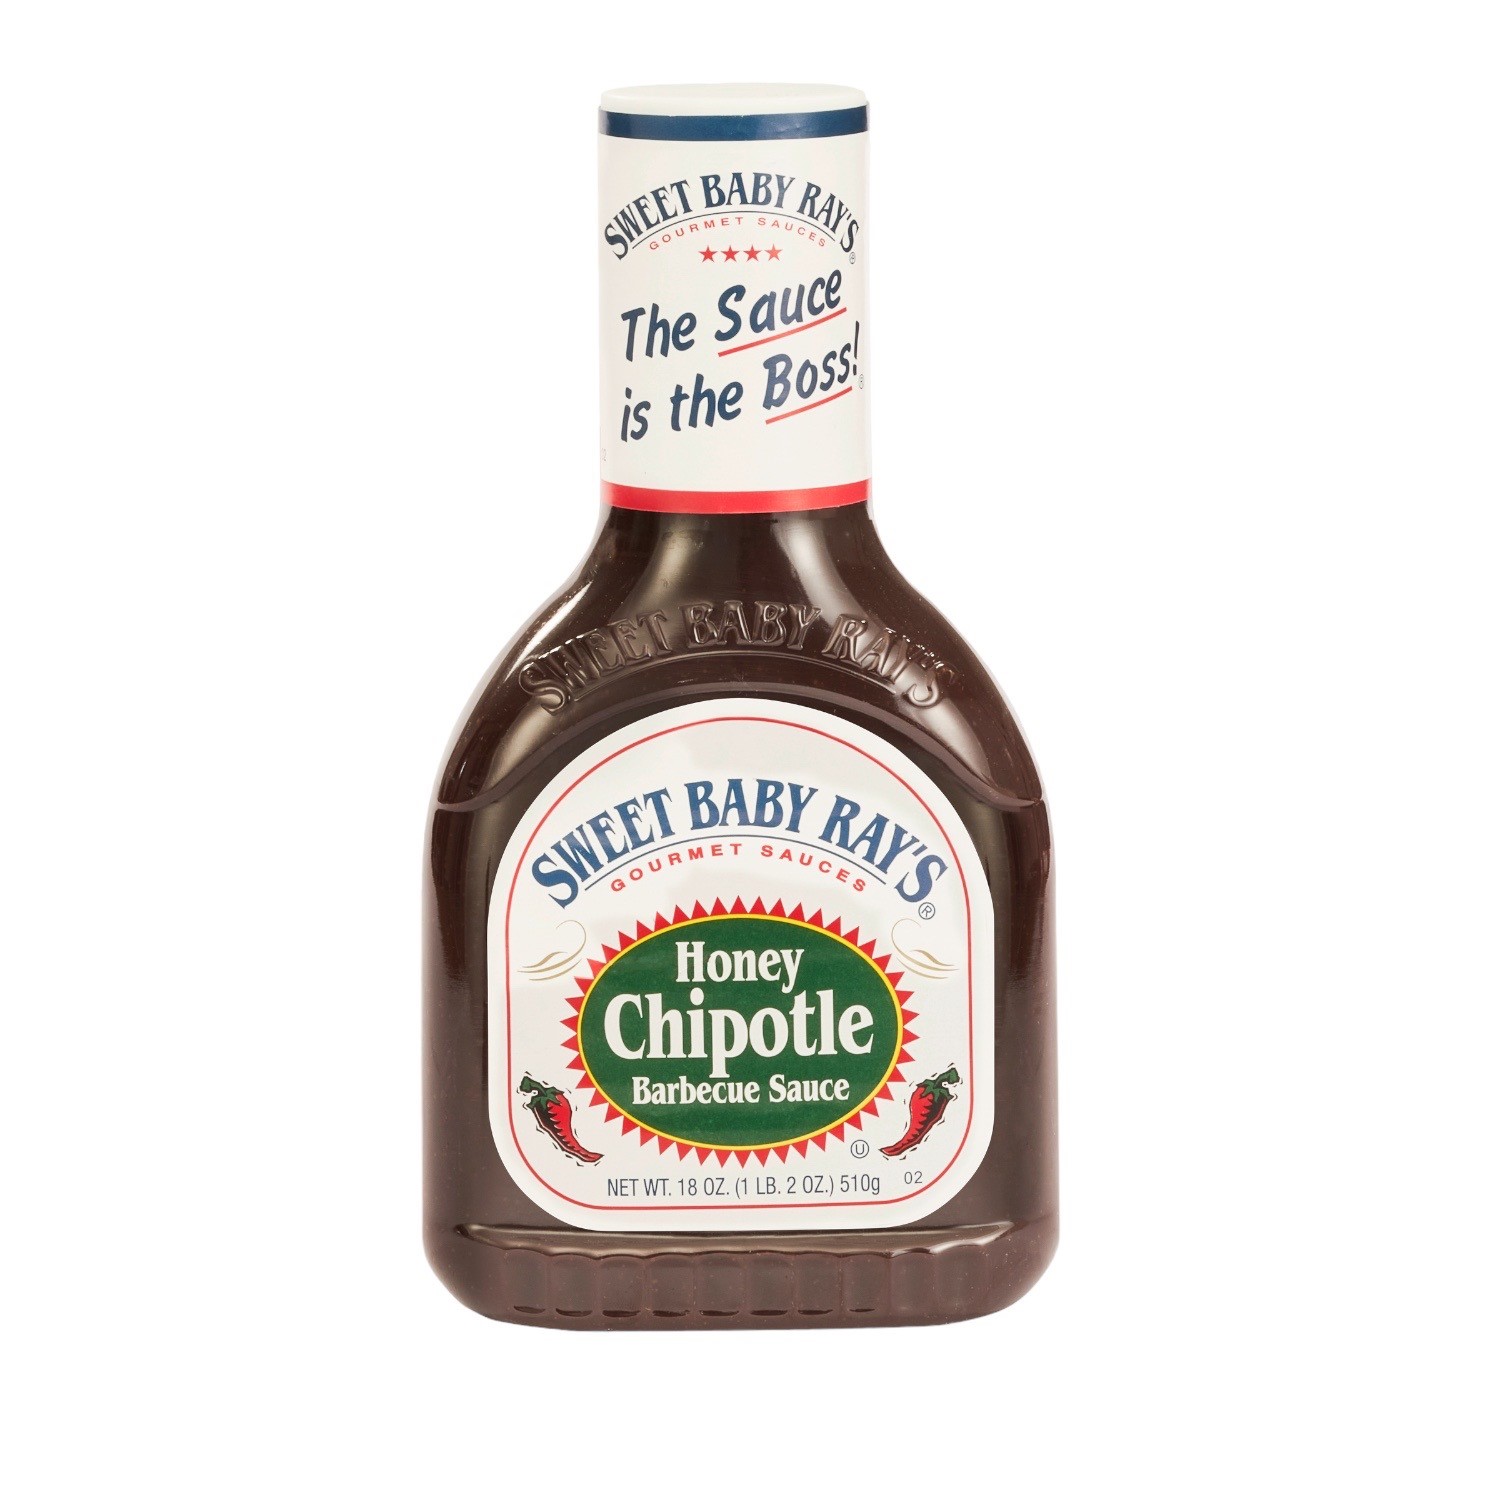 Sweet Baby Ray's „Honey Chipotle Barbecue Sauce" 510g